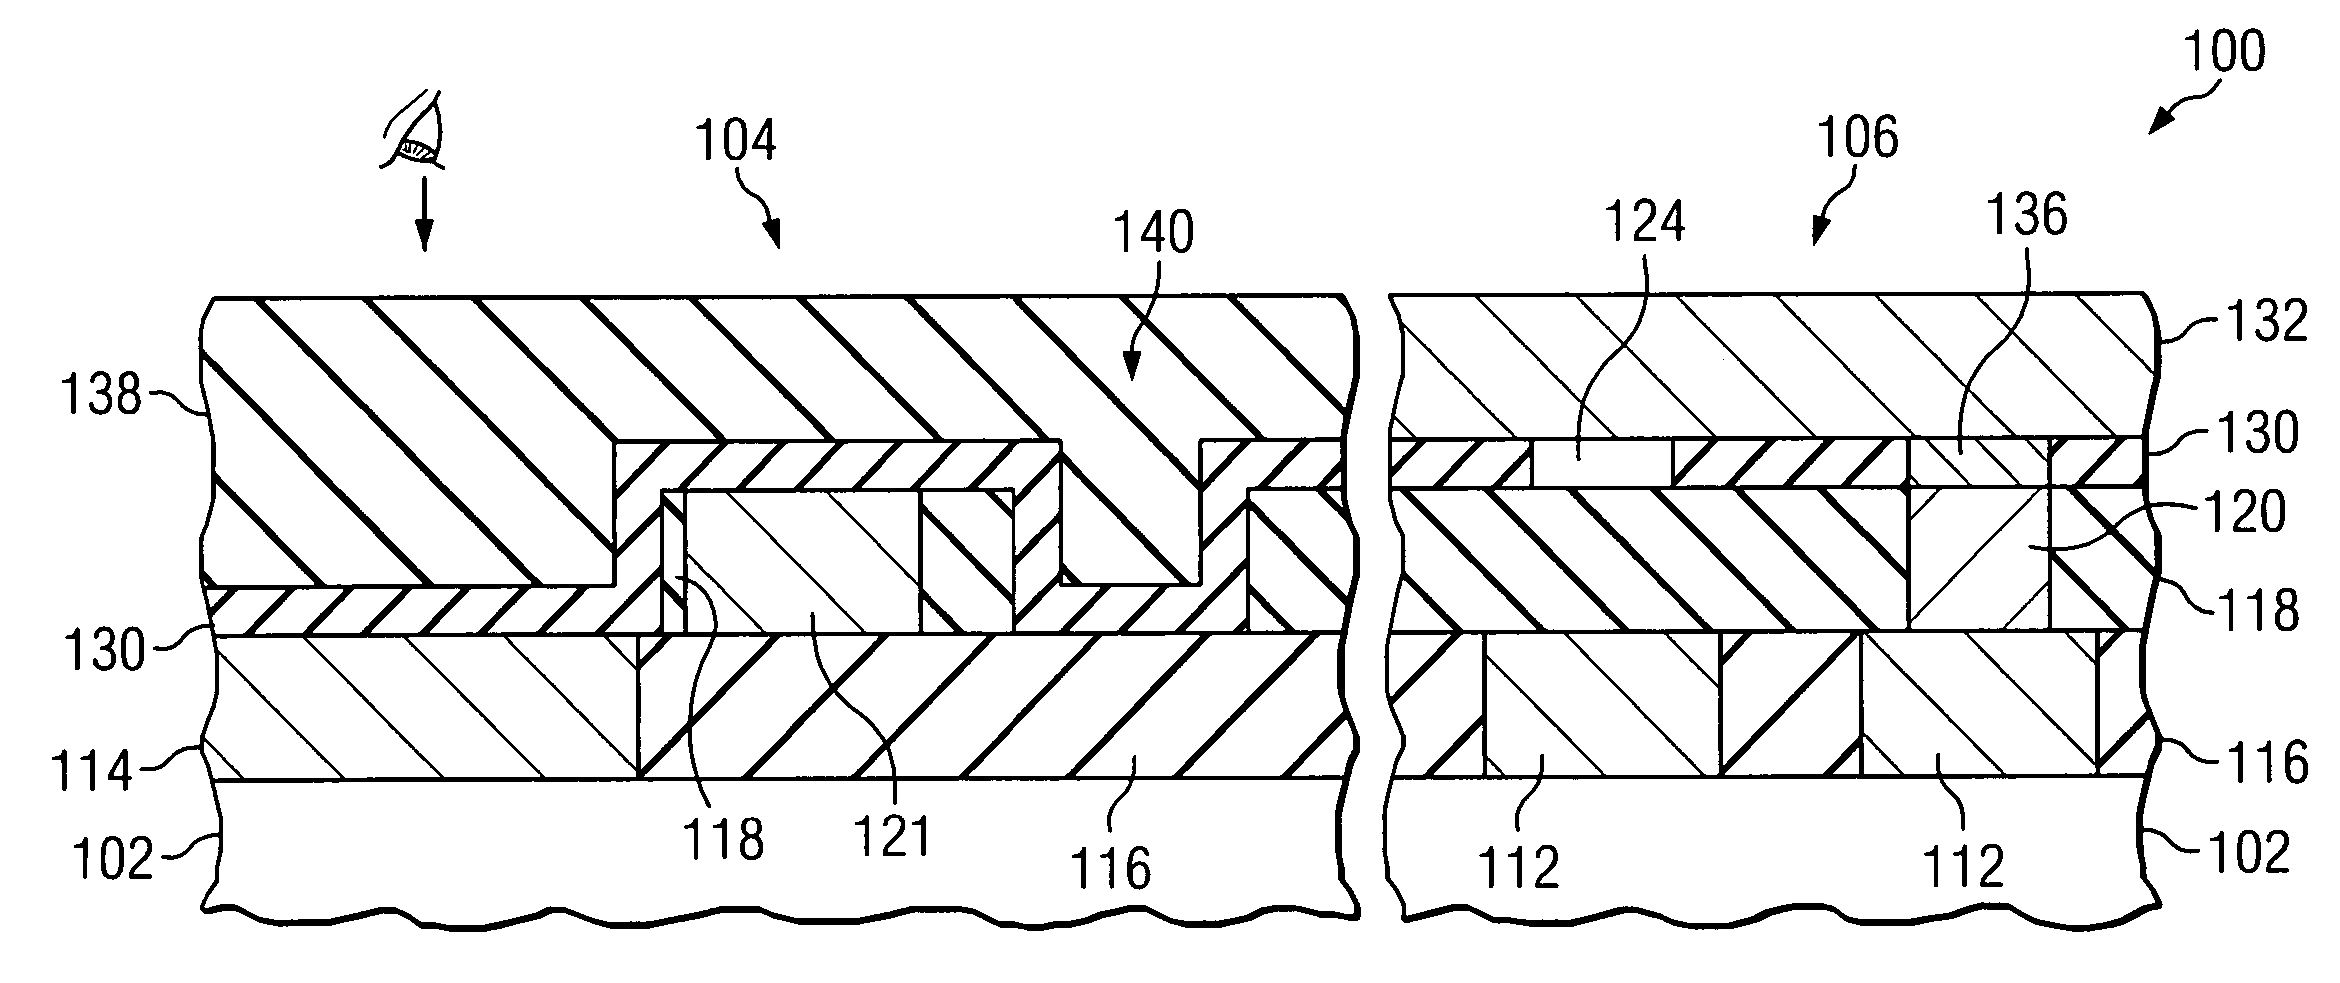 Alignment of MTJ stack to conductive lines in the absence of topography